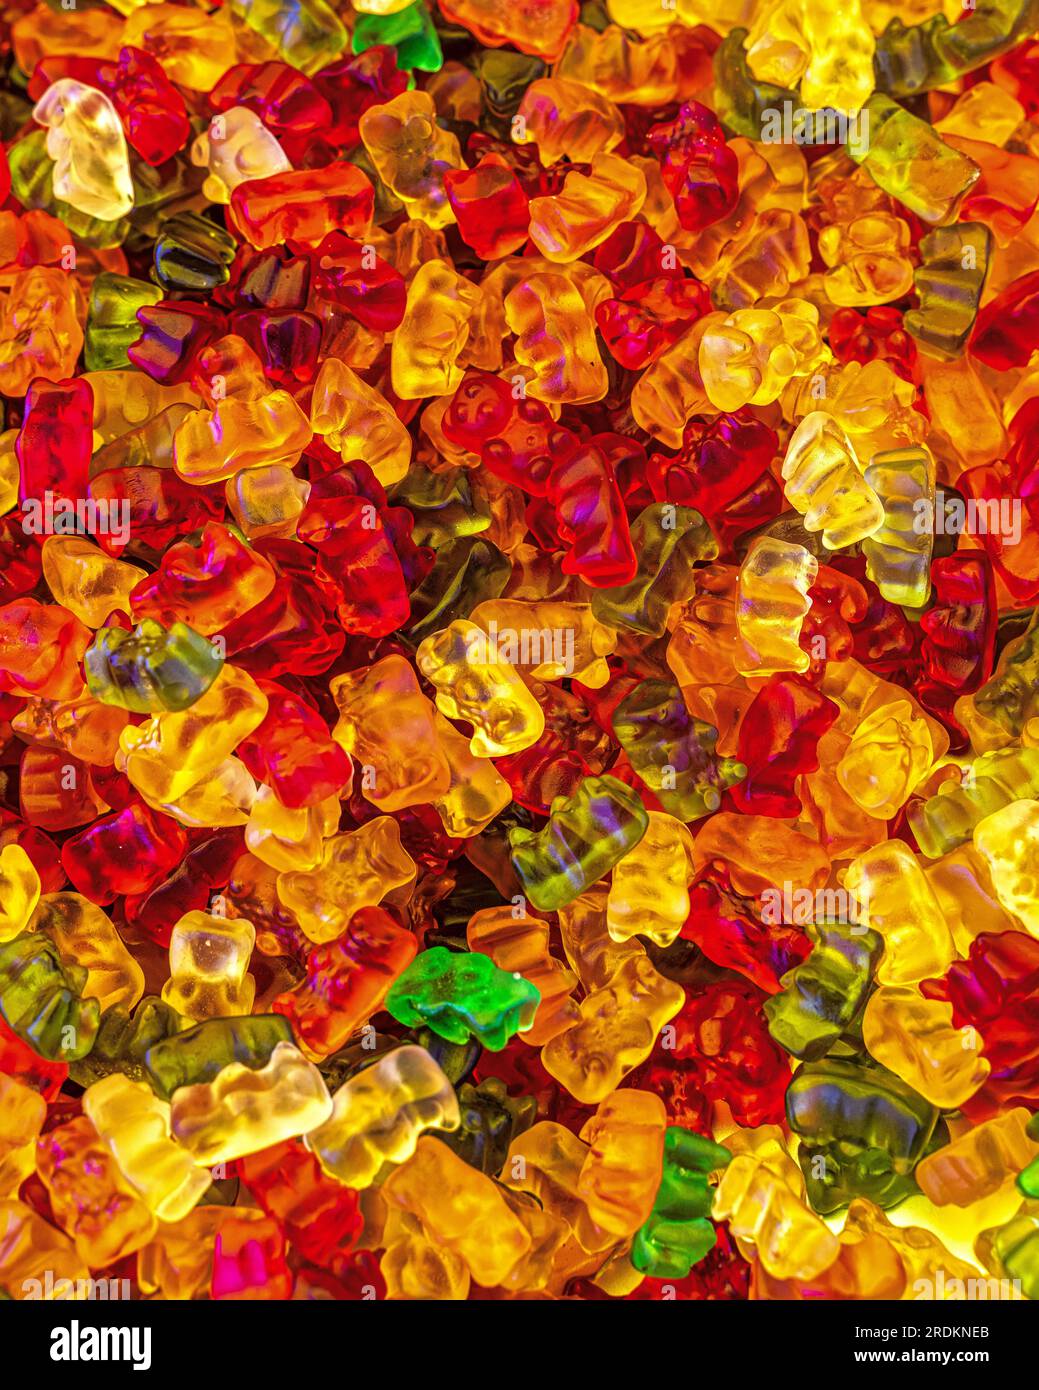 Assorted and colorful candies in the market stalls Stock Photo